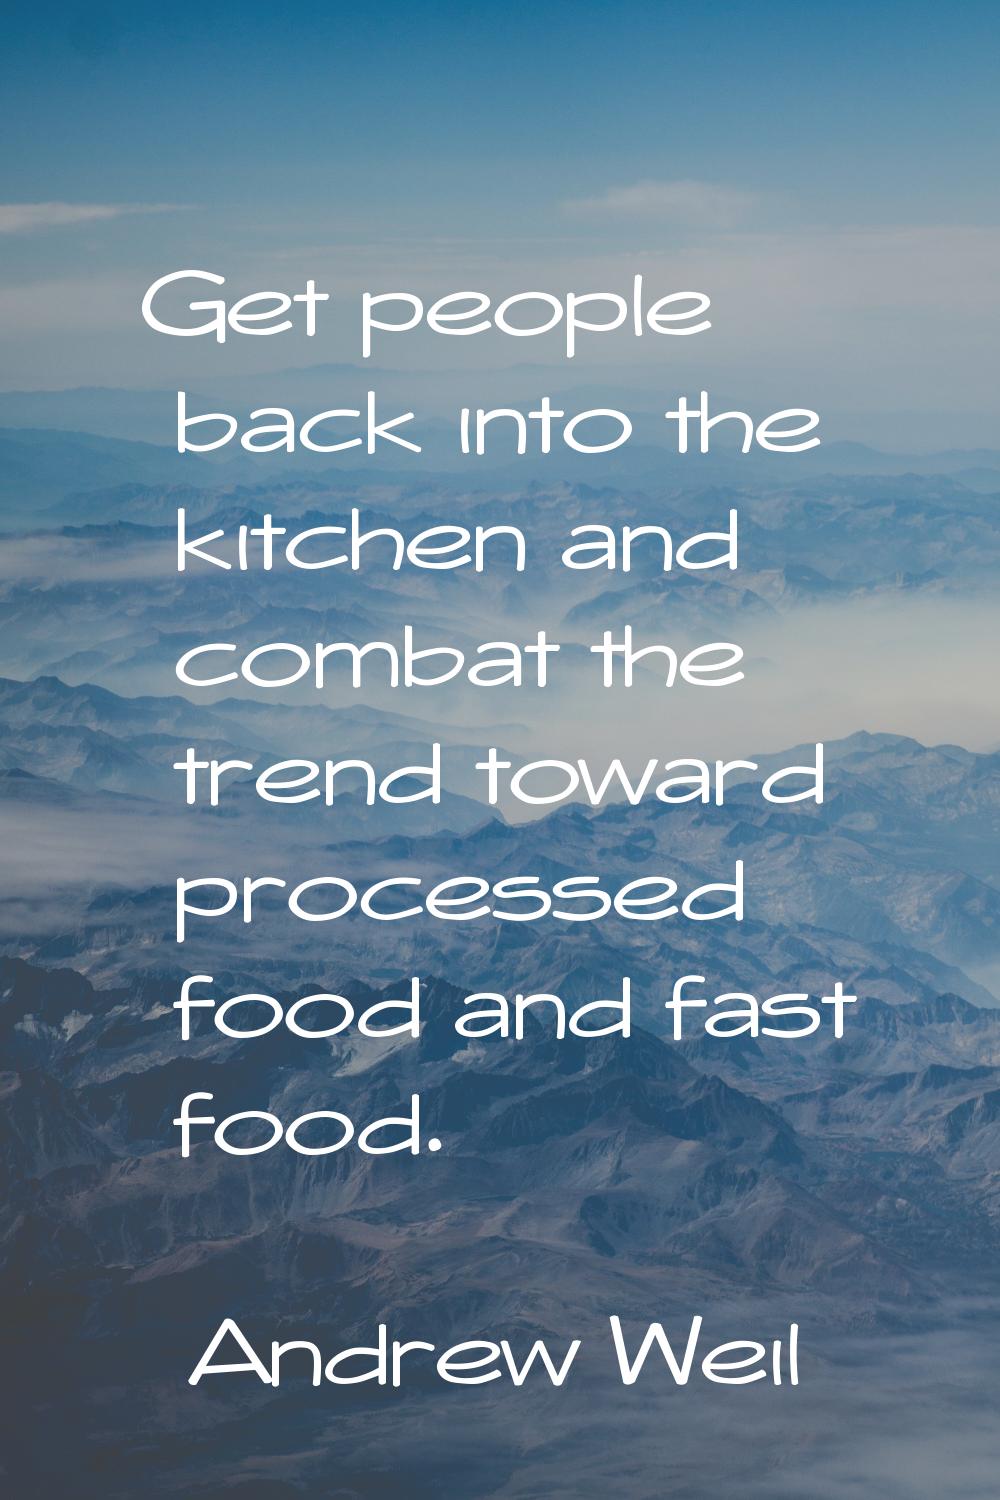 Get people back into the kitchen and combat the trend toward processed food and fast food.